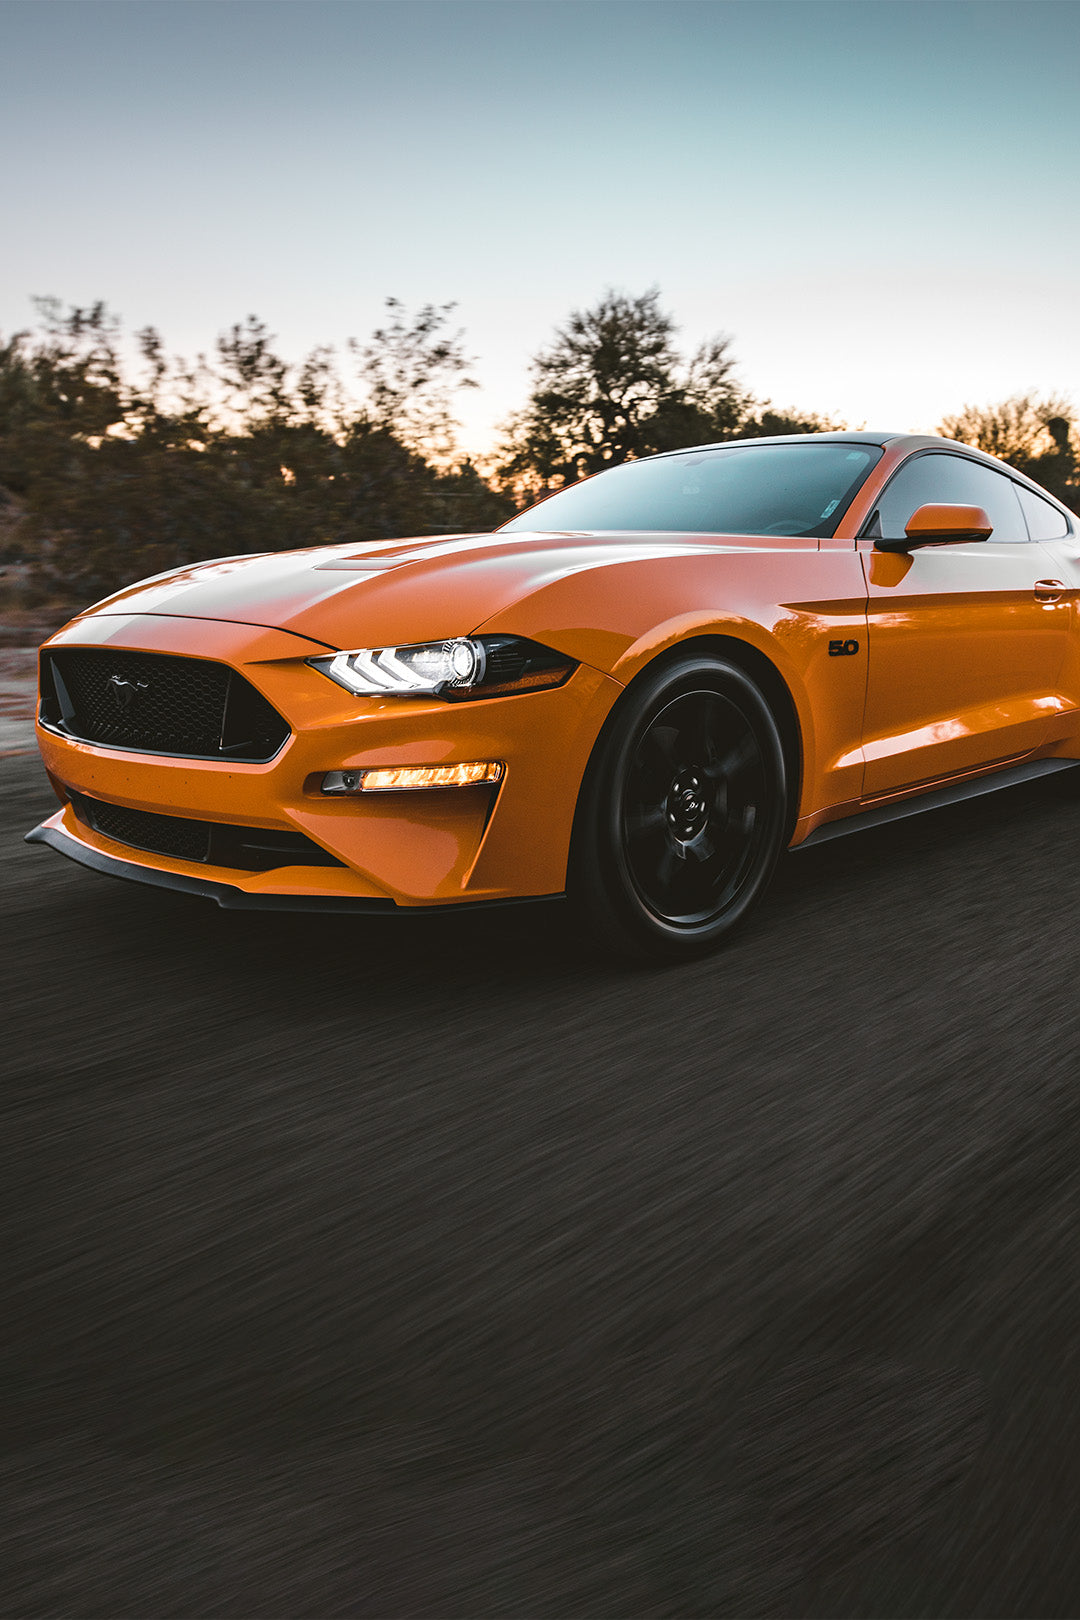 A ford mustang being driven on a road at sunset.